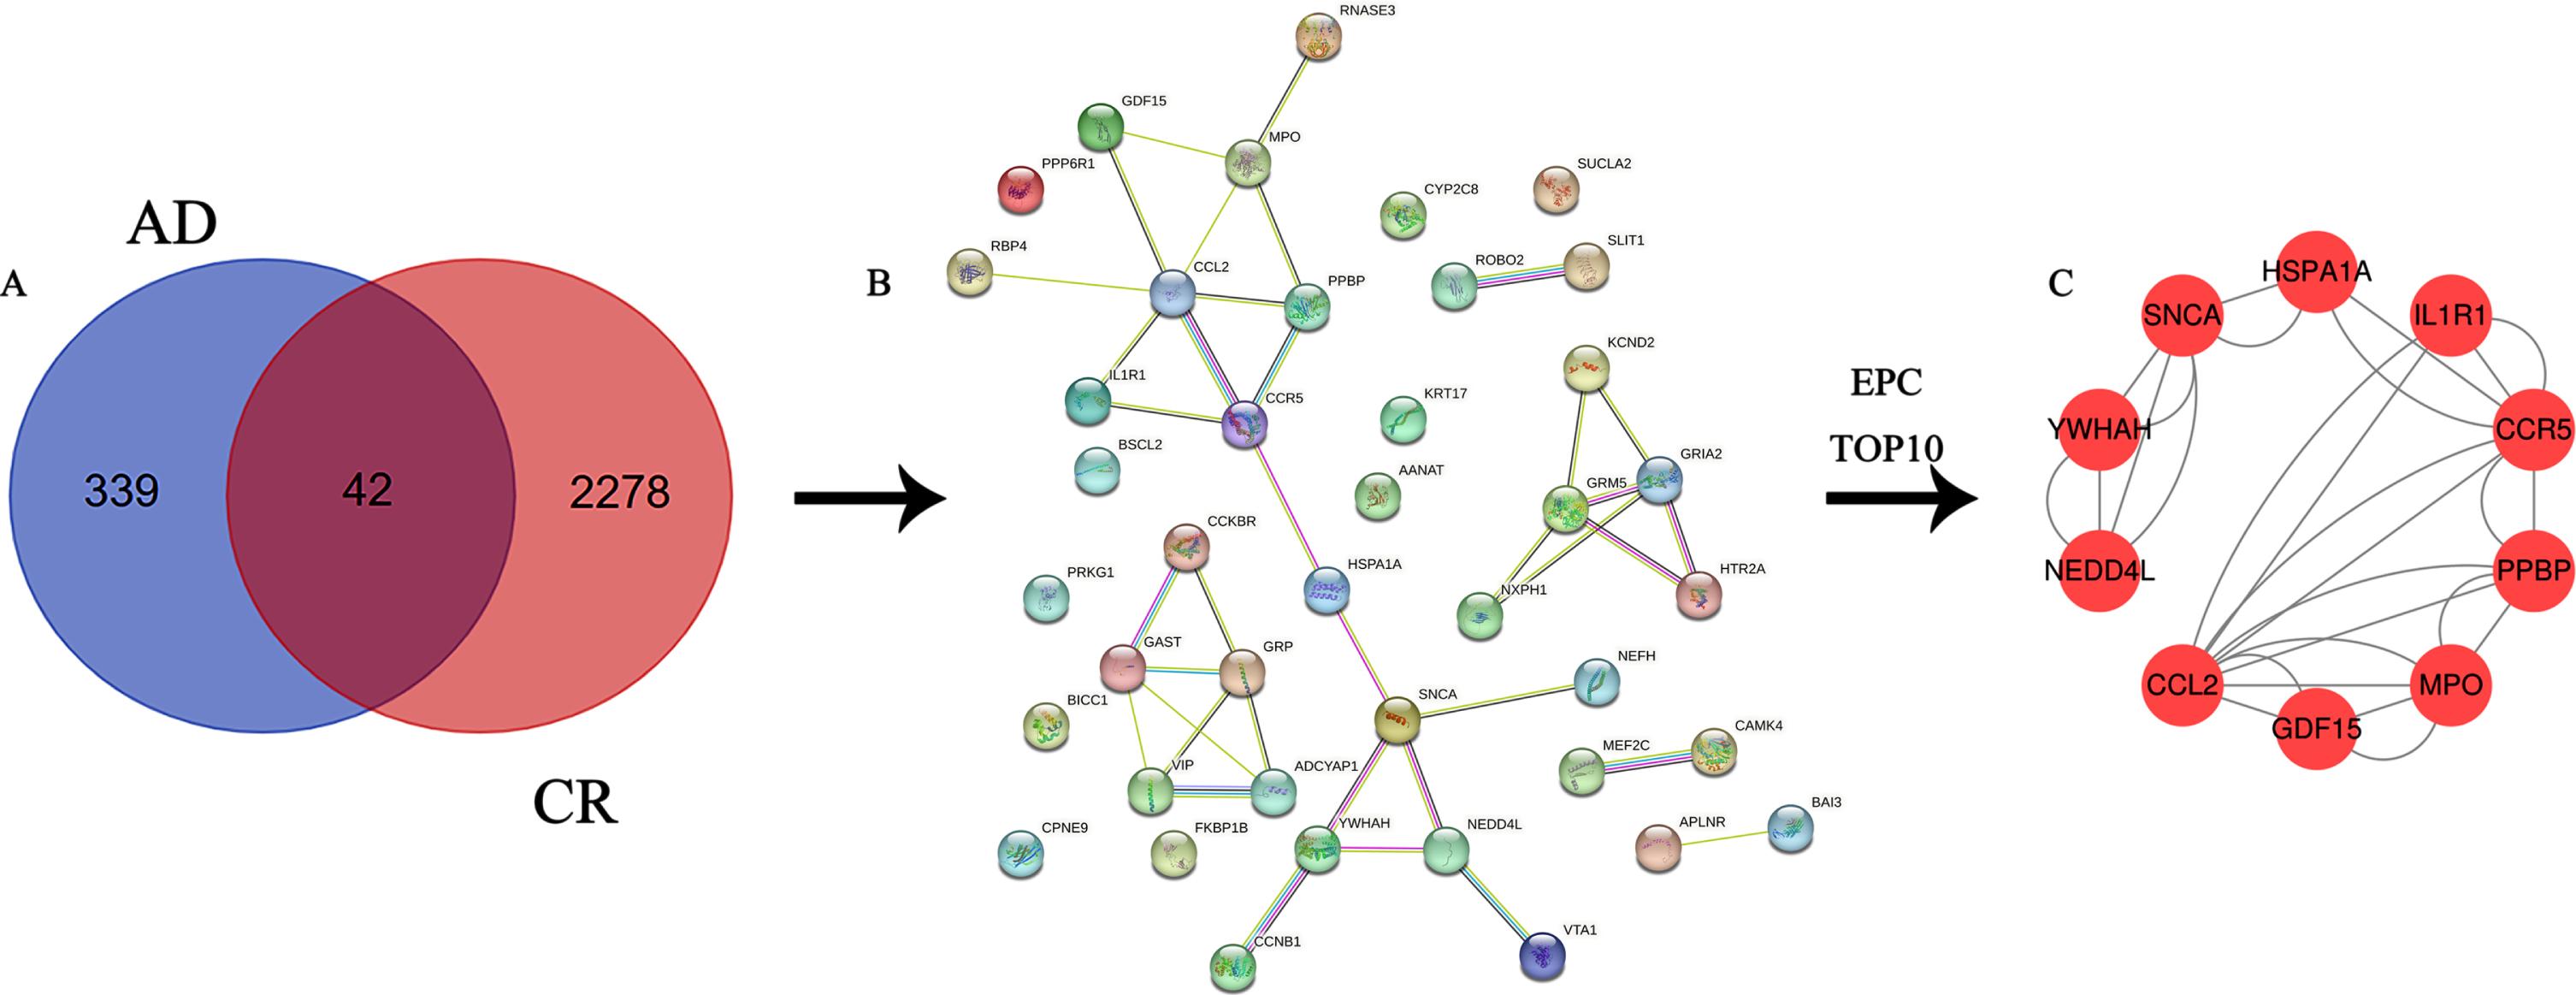 A) Venn diagram of the intersection of differential genes and circadian rhythm-associated genes in Alzheimer’s disease; B) PPI network diagram of intersecting genes; C) PPI network diagram of 10 hub genes.